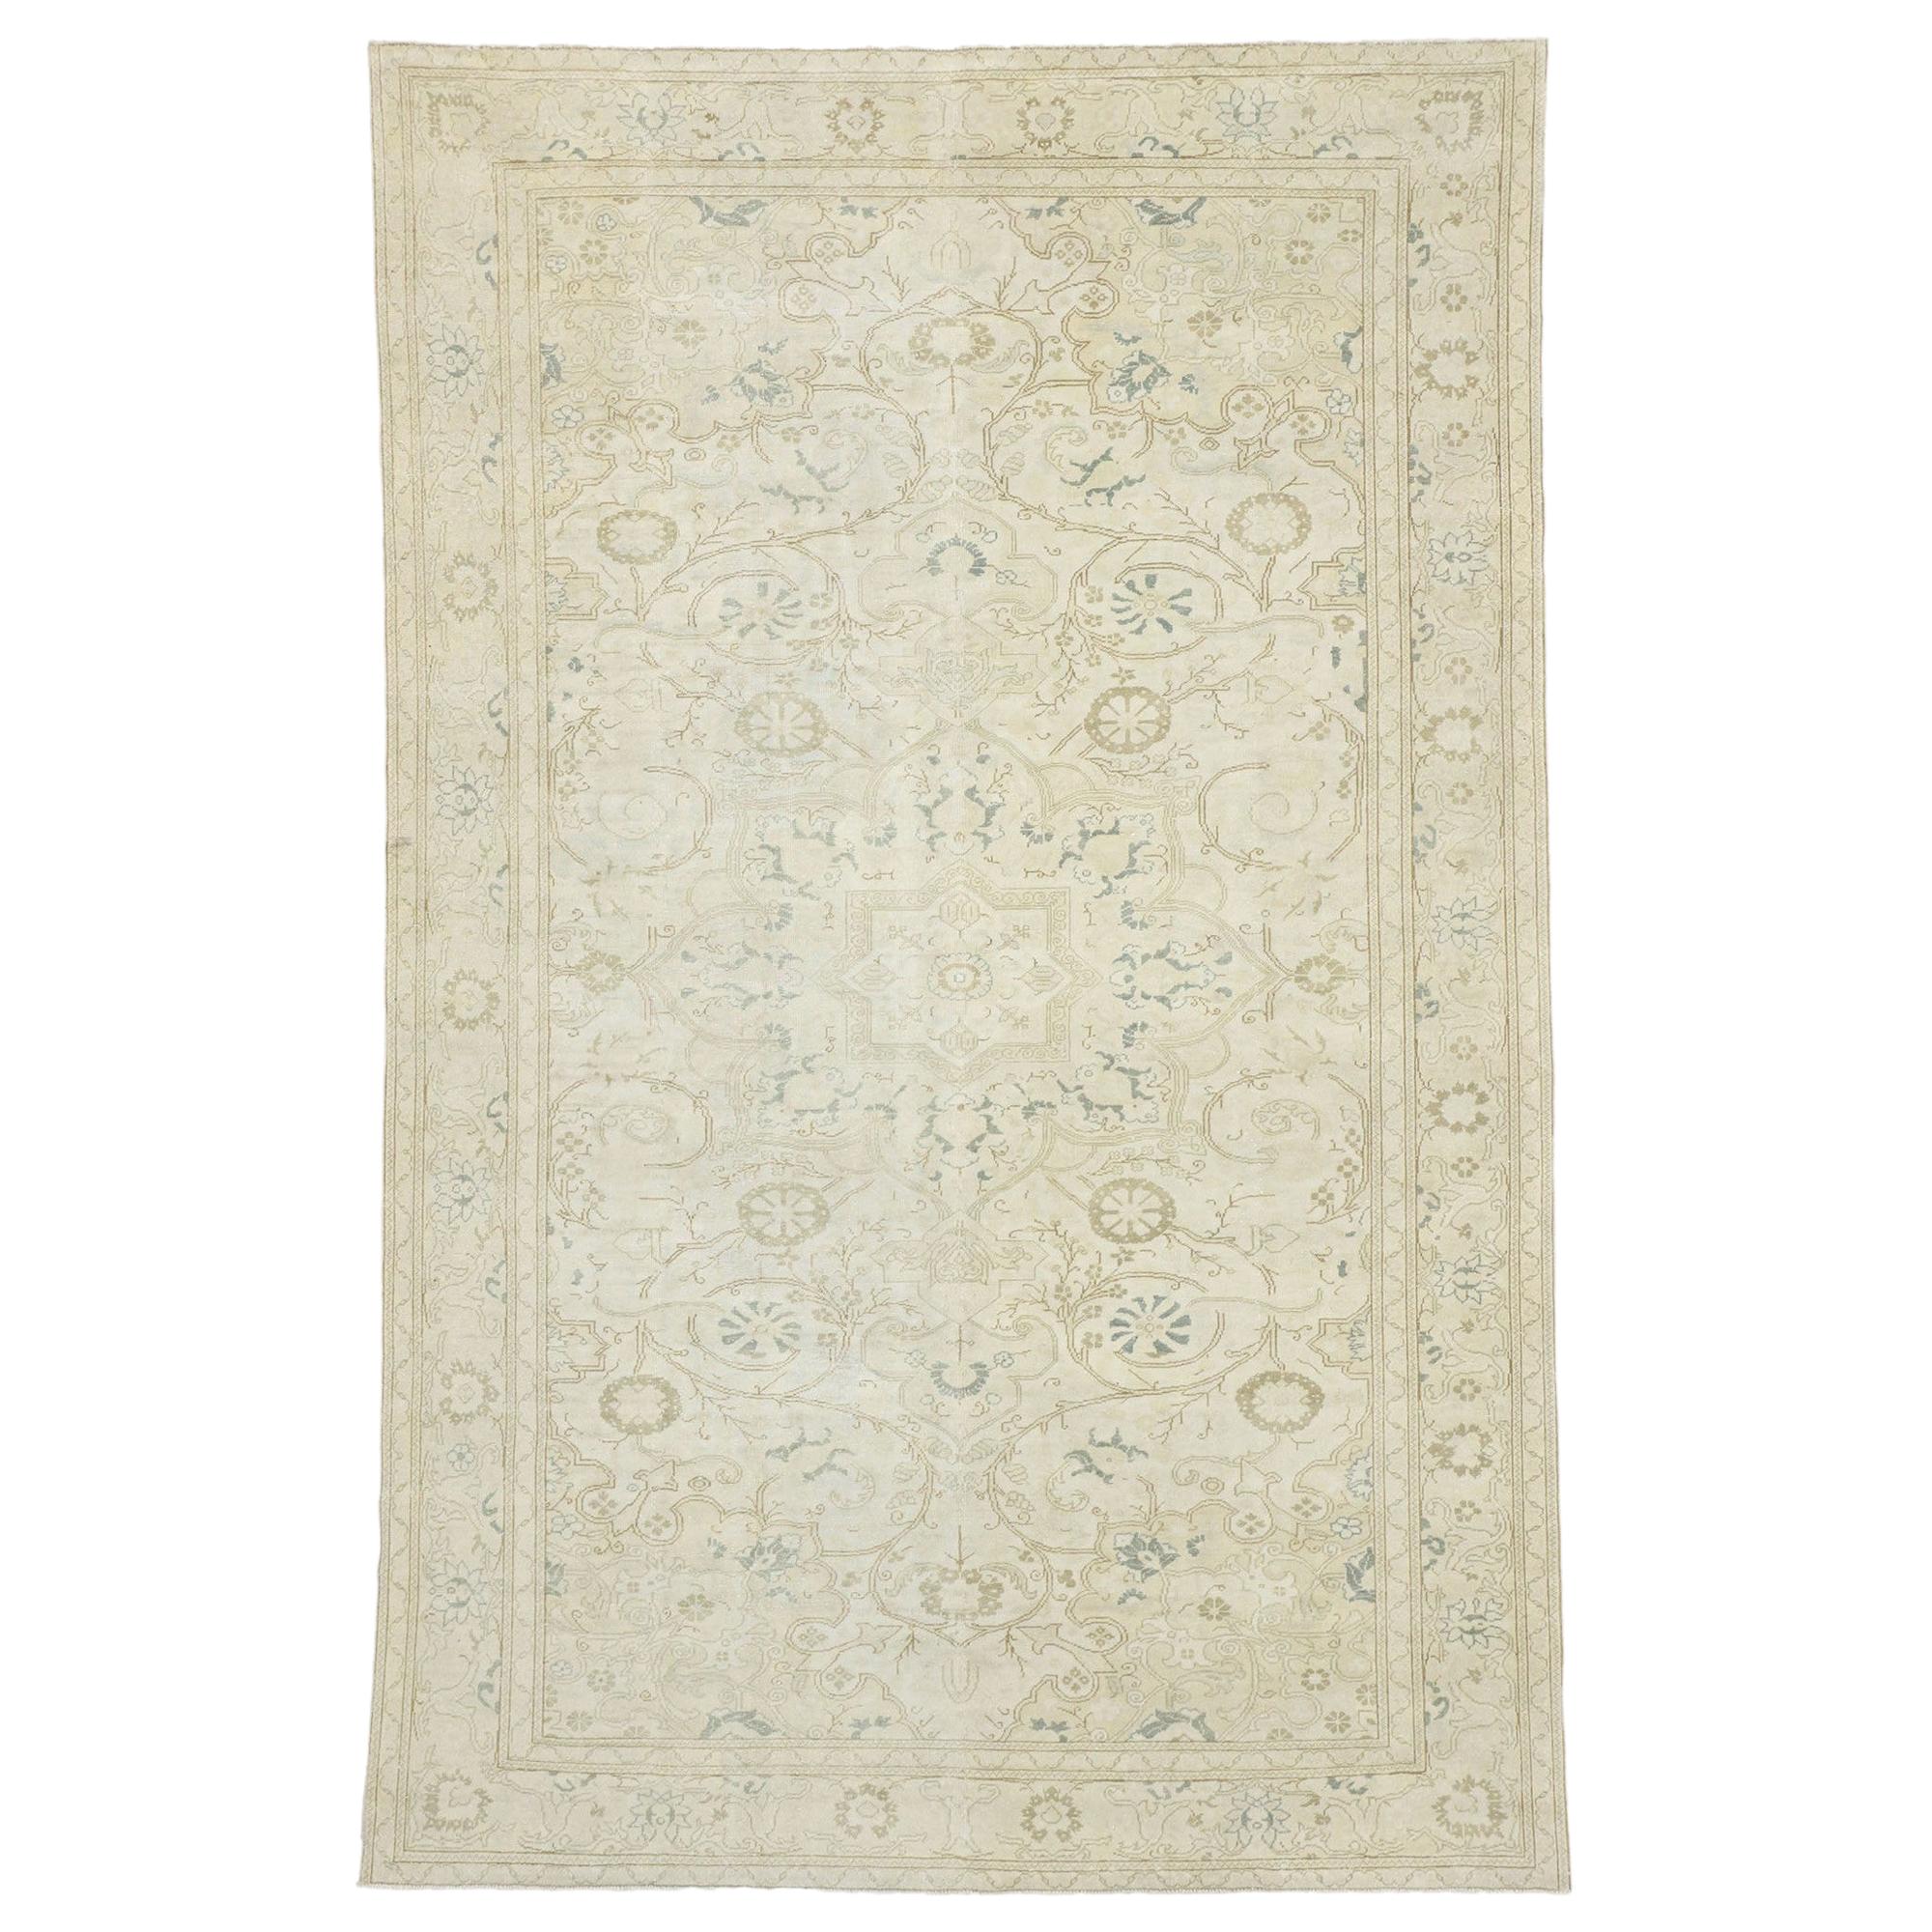 Distressed Vintage Turkish Sivas Rug with Modern Rustic Cotswold Cottage Style